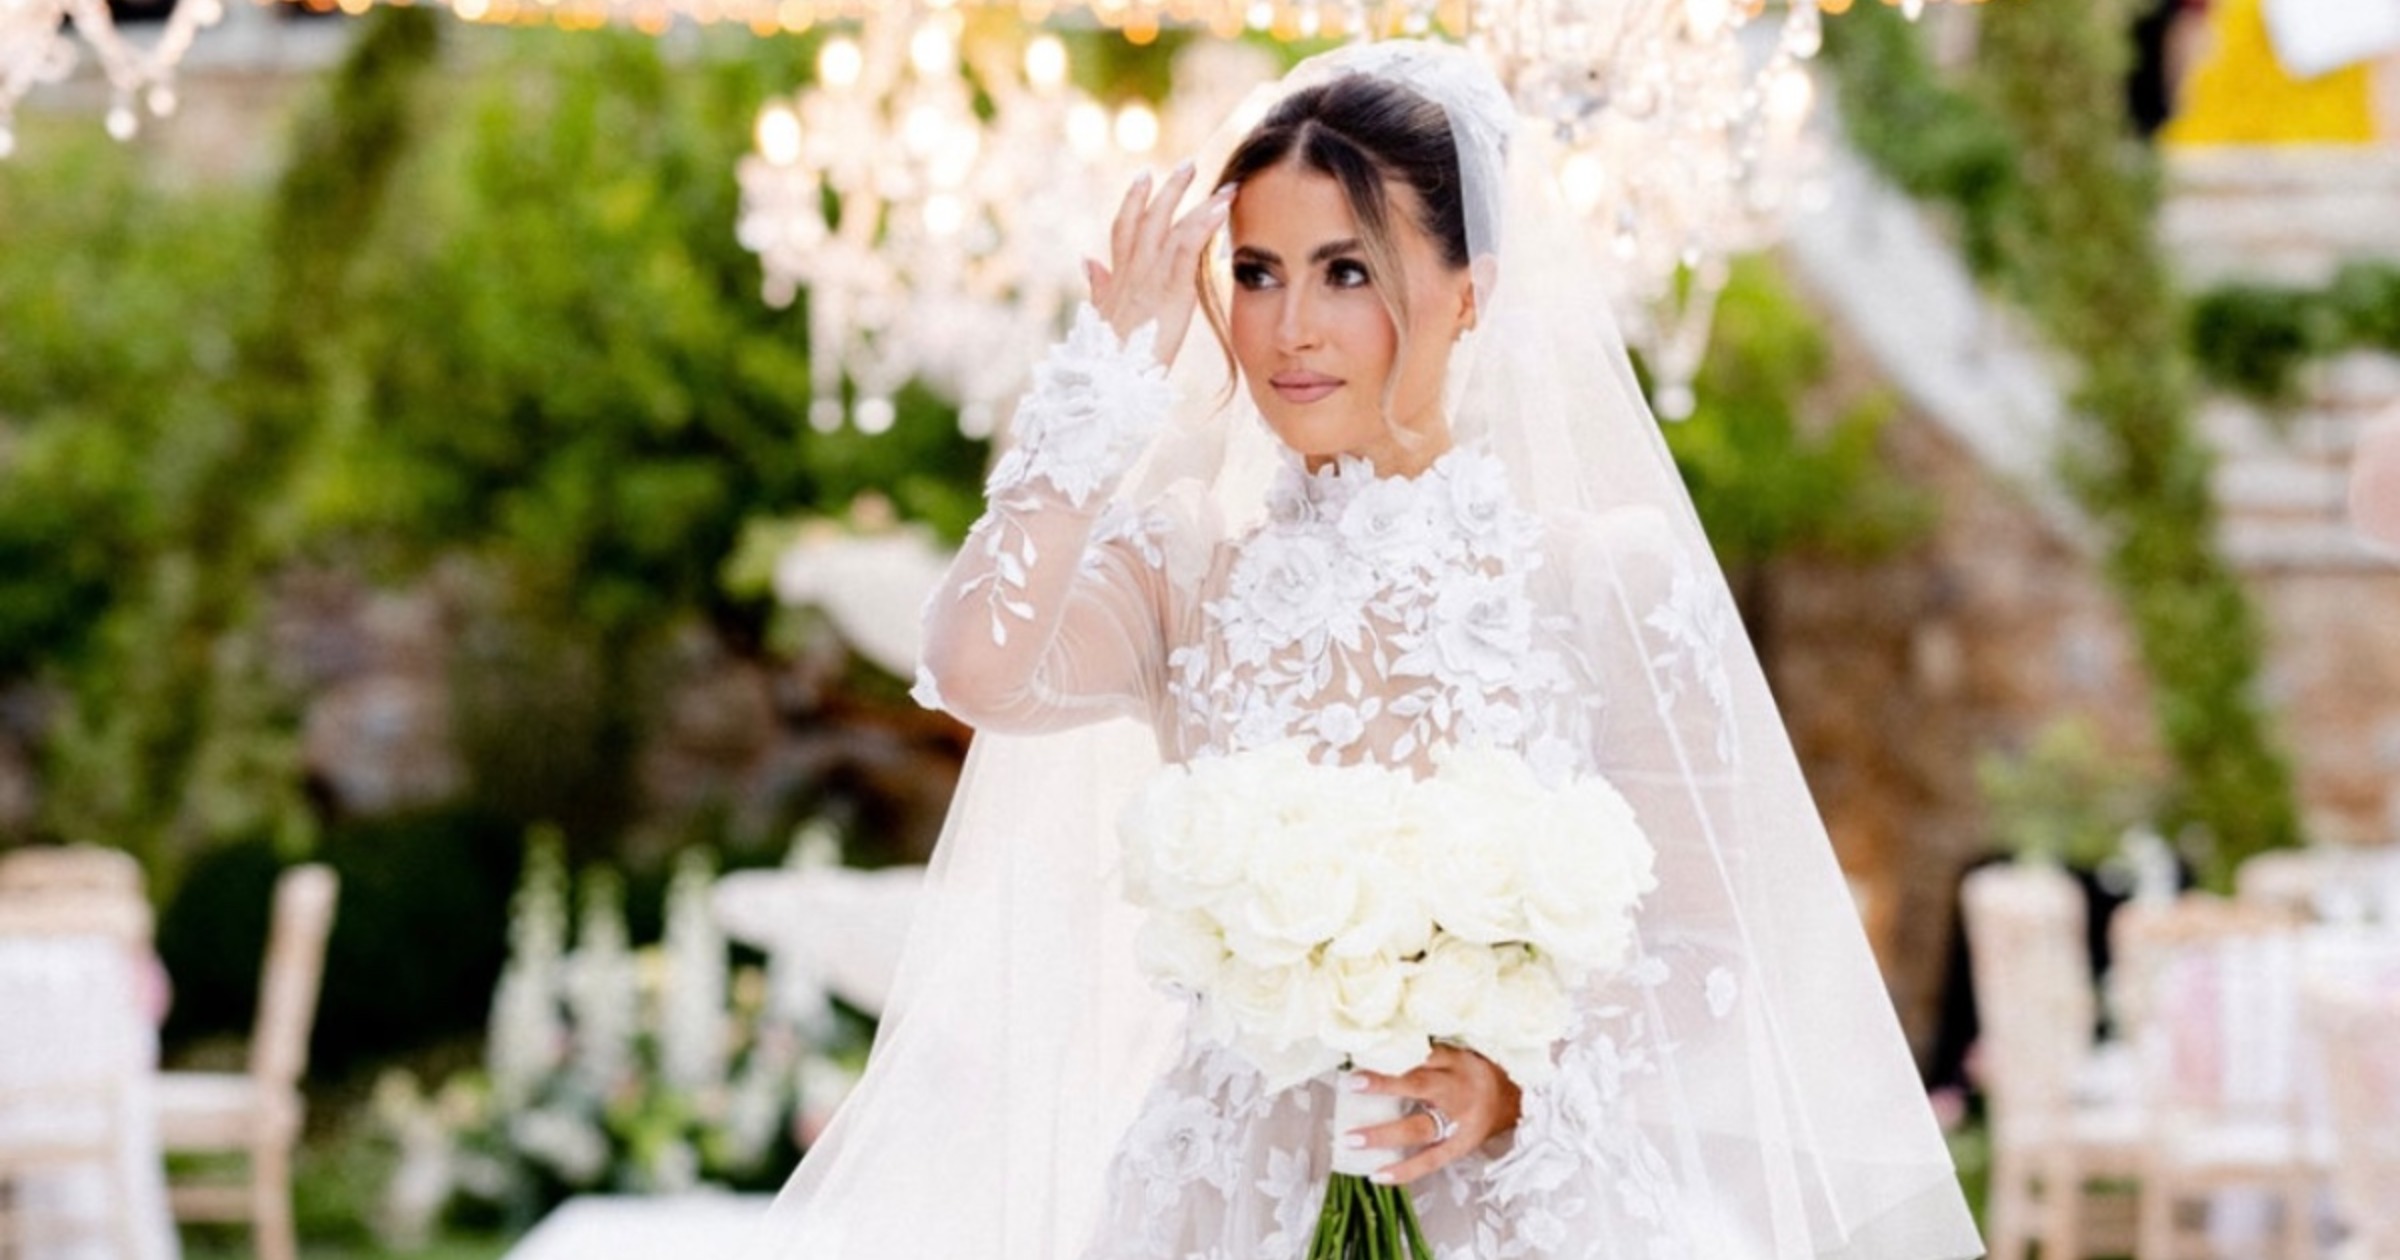 A glamorous Greek wedding that could literally be in Vogue